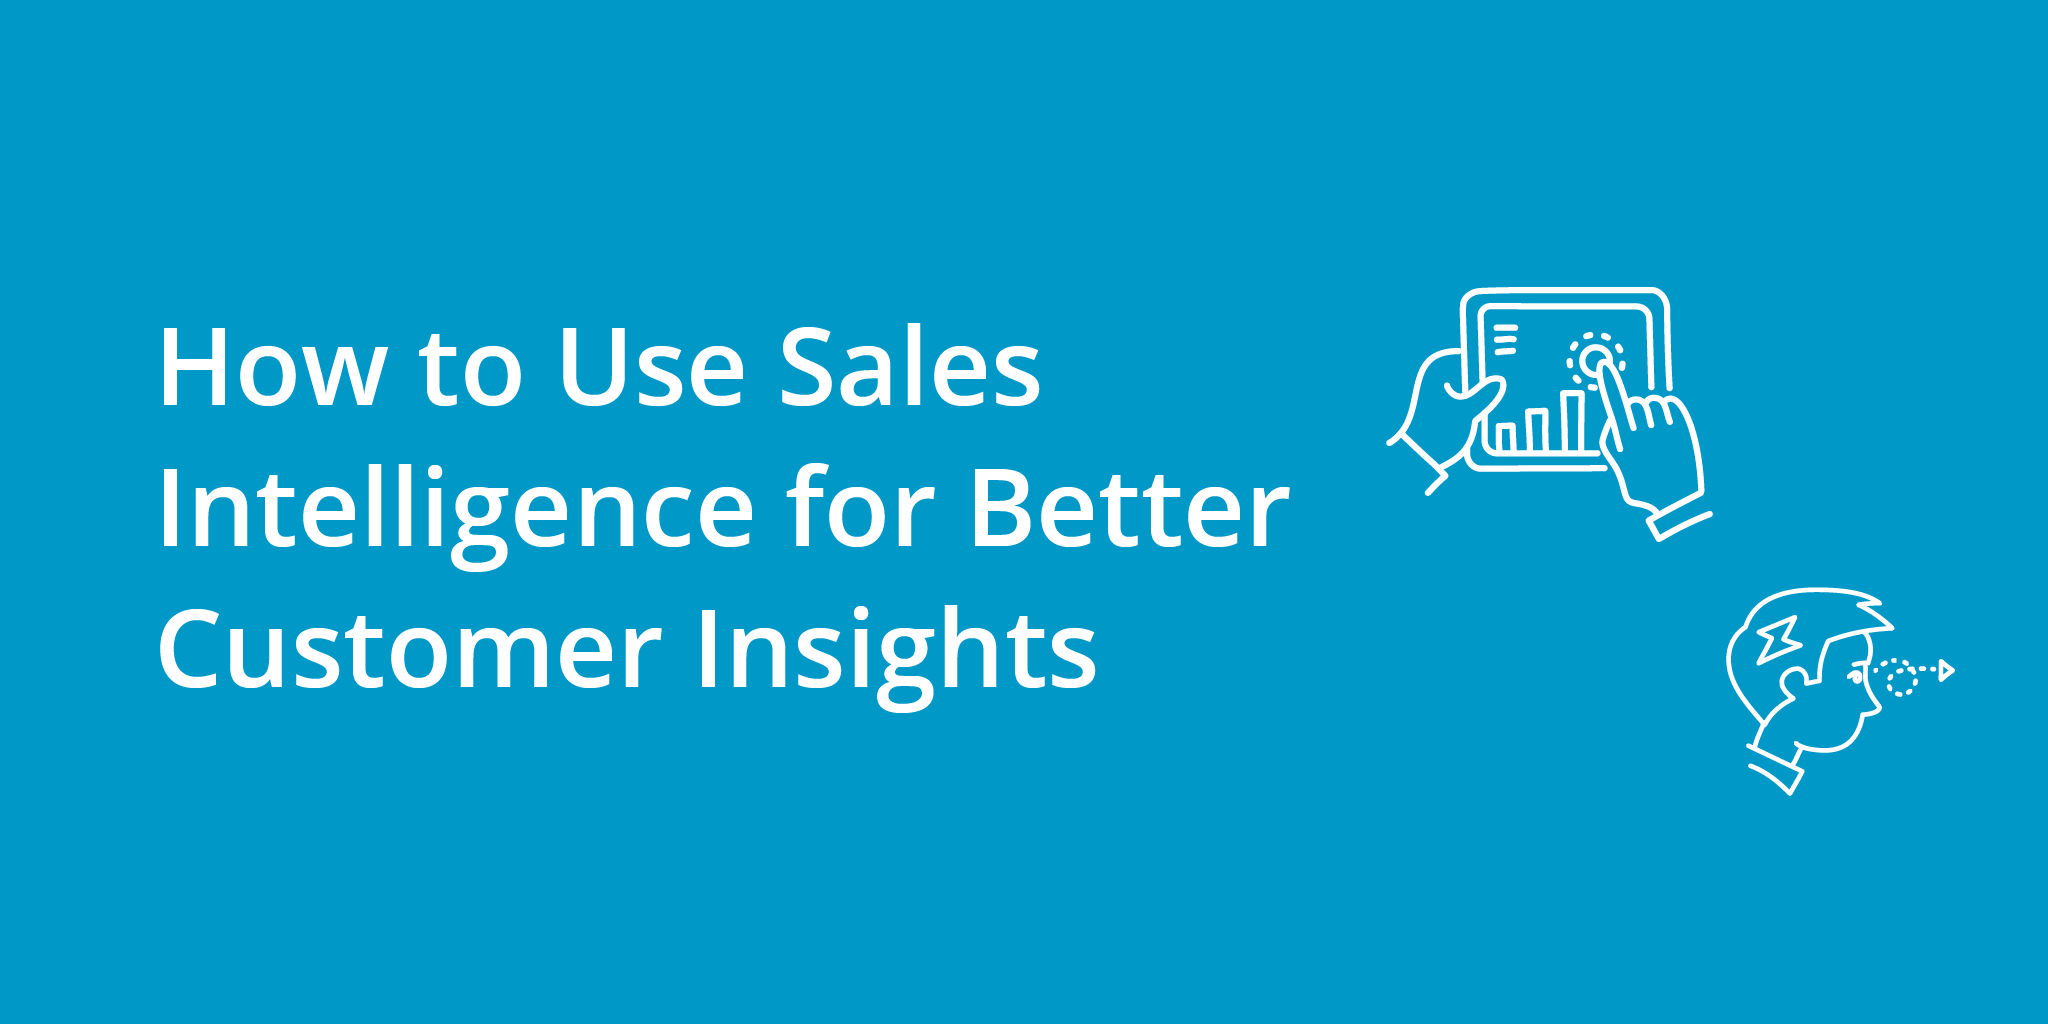 How to Use Sales Intelligence for Better Customer Insights | Telephones for business